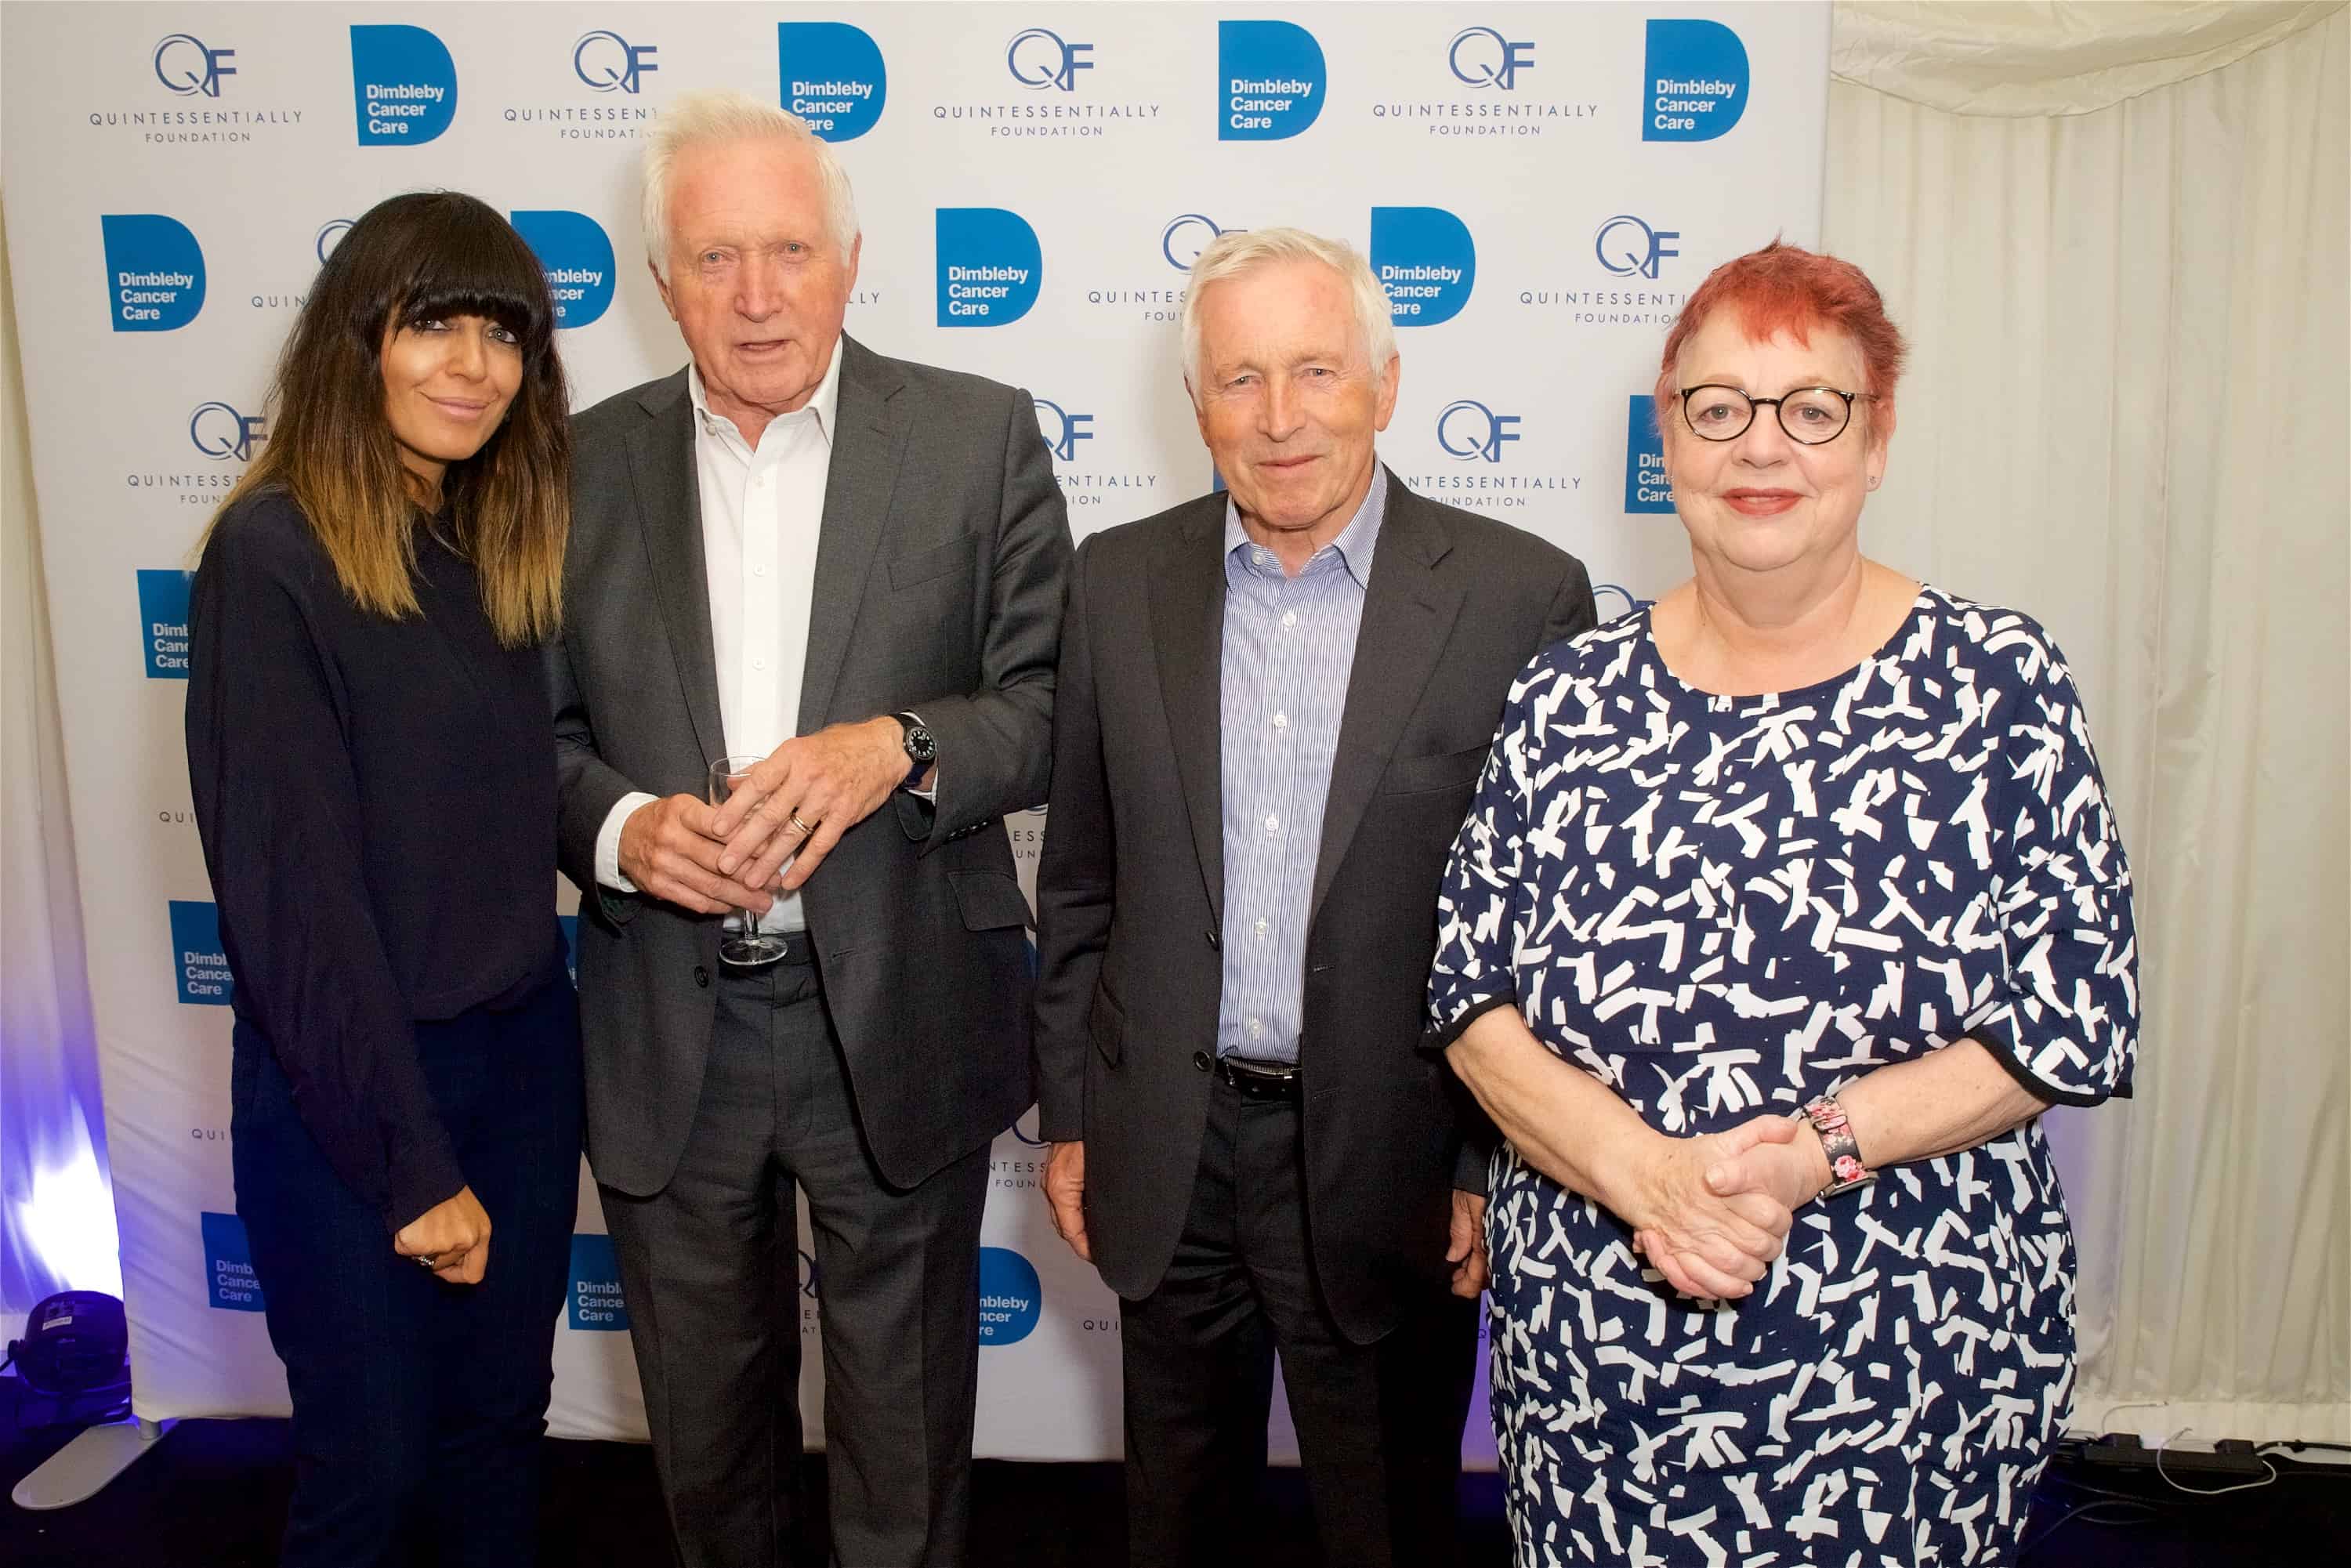 Claudia Winkleman, David Dimbleby, Jonathan Dimbleby and Jo Brand all attended the event